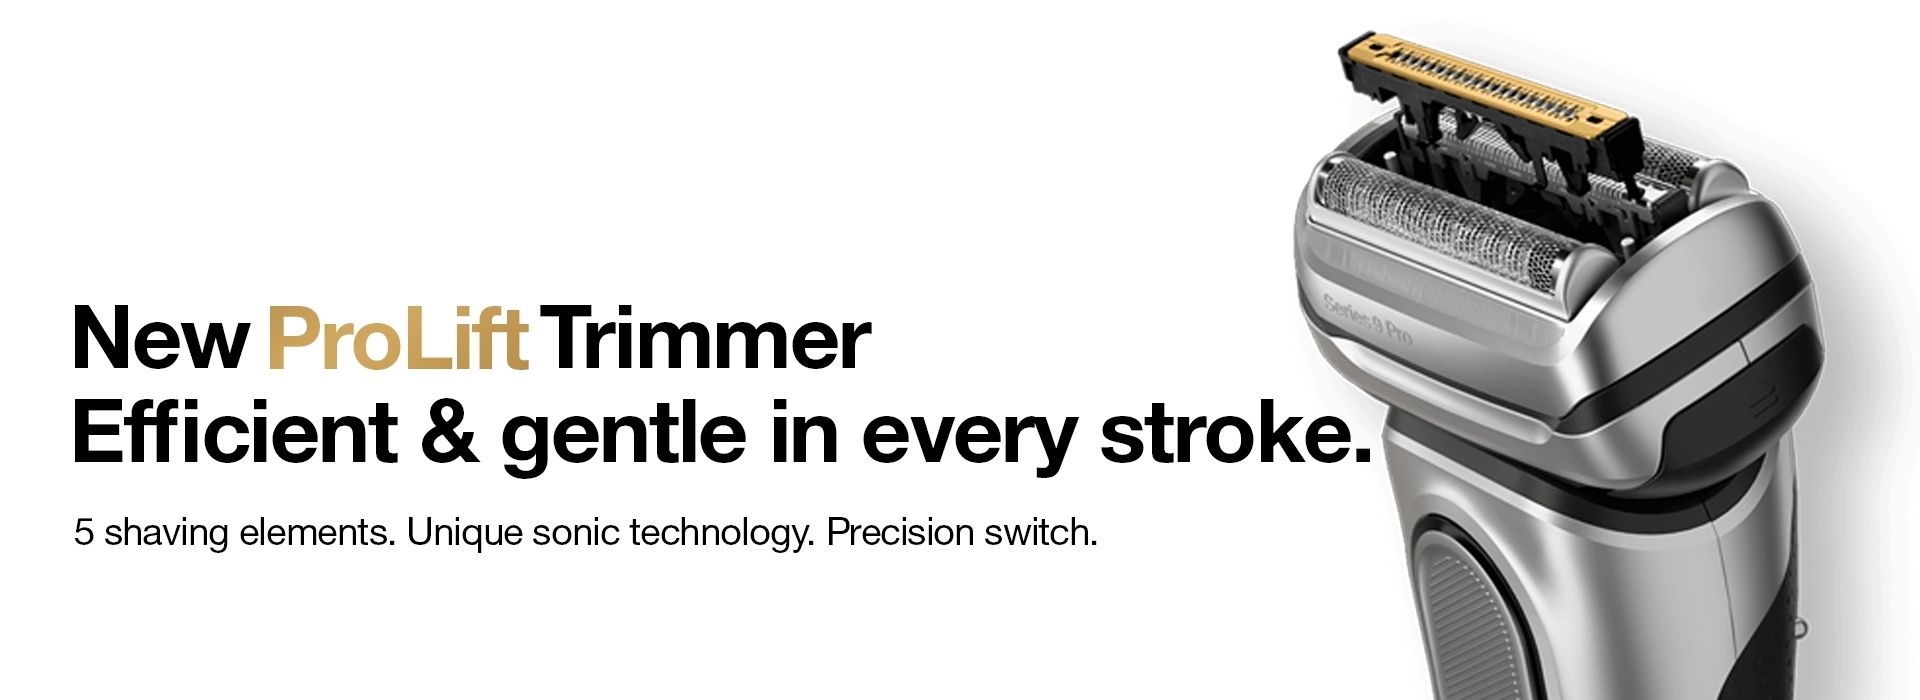 New Braun Prolift Trimmer, efficient and gentle in every stroke. 5 shaving elements. unique sonic technology. precision switch